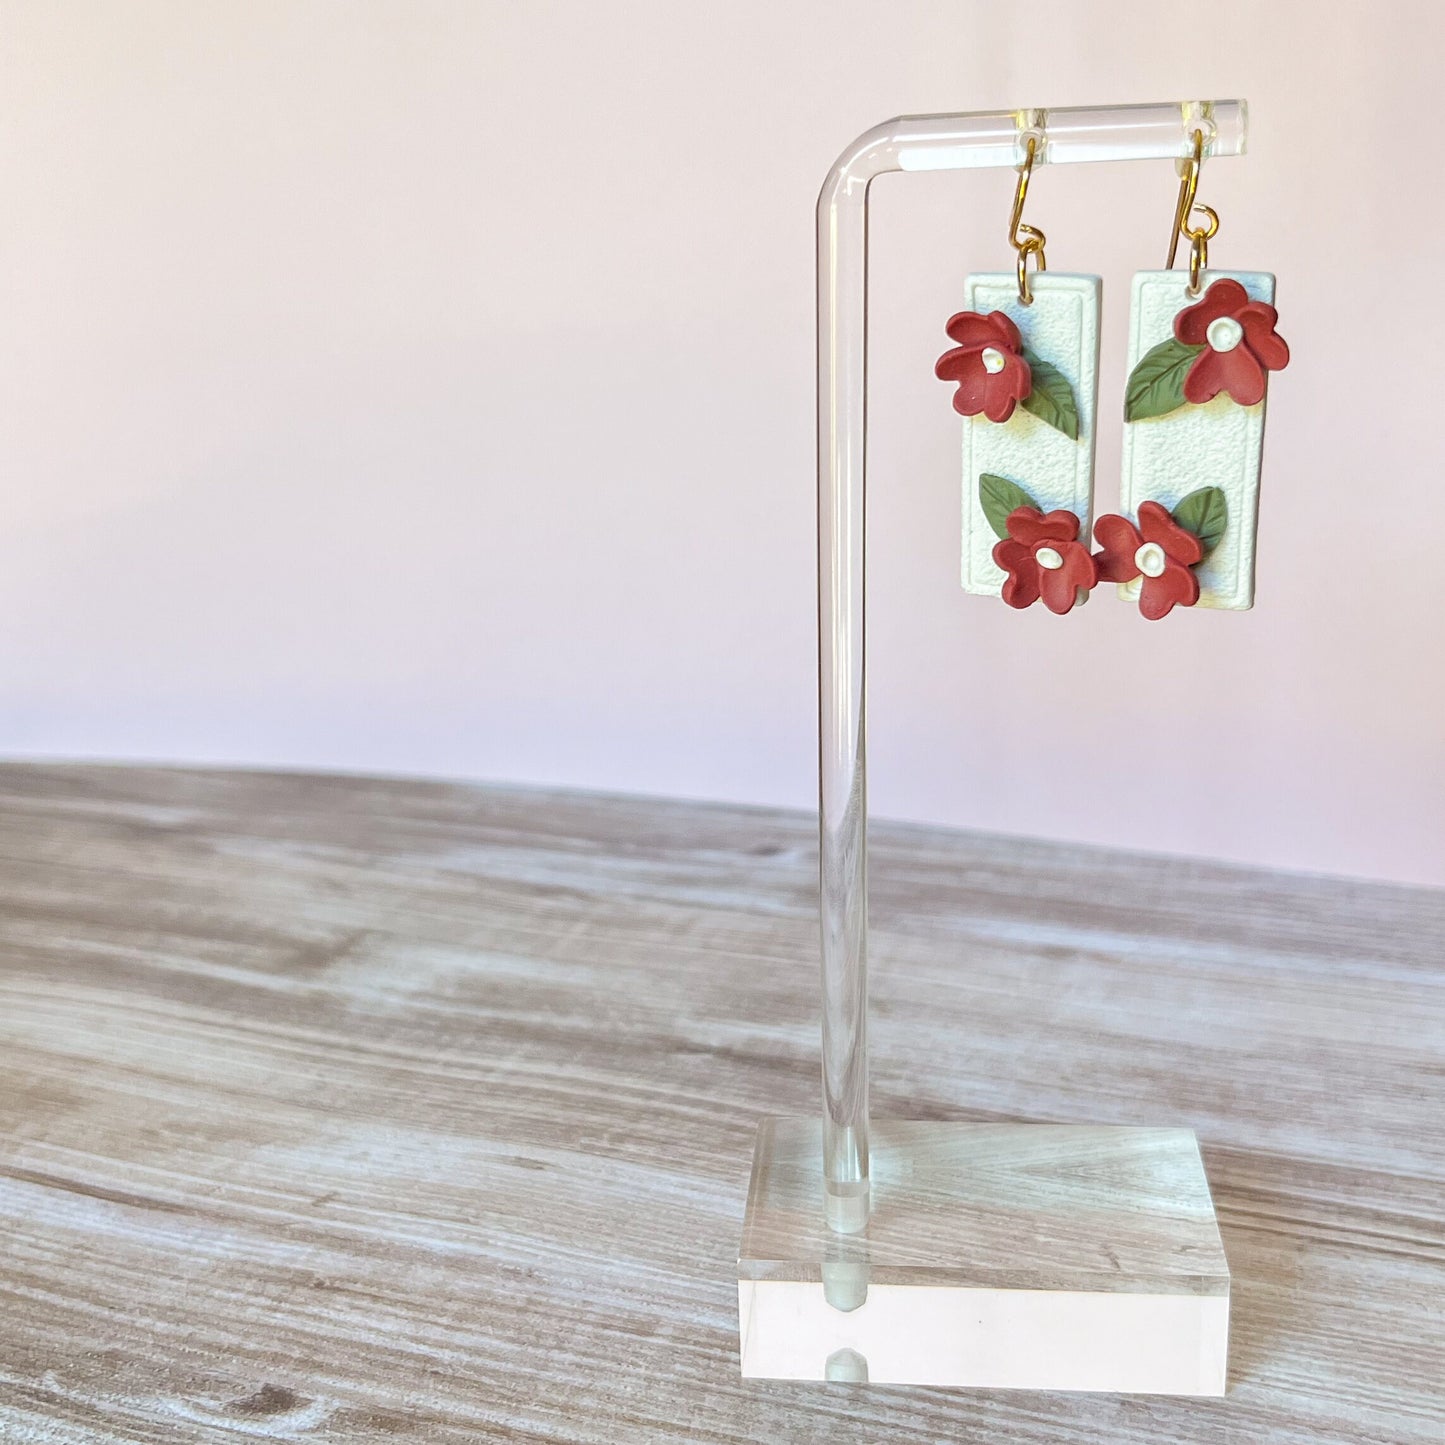 Red floral rectangle earrings | 18k gold plated